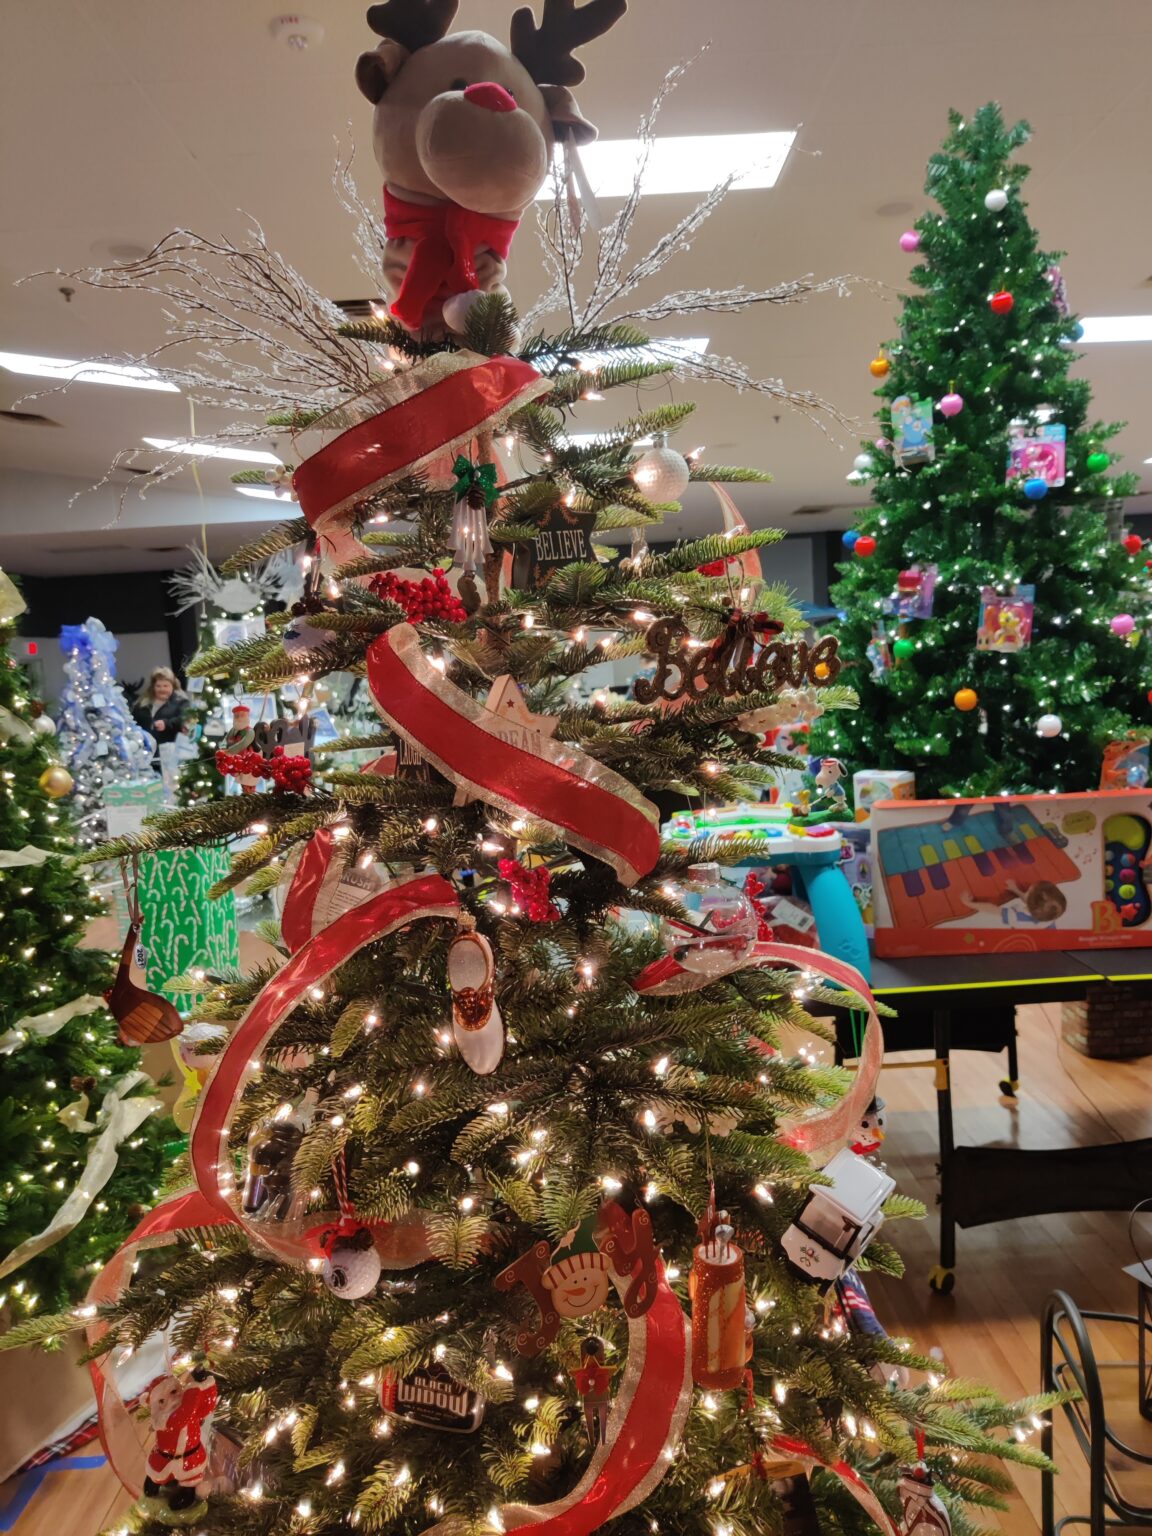 Join us for Waterville's Festival of Trees! | KVCAP